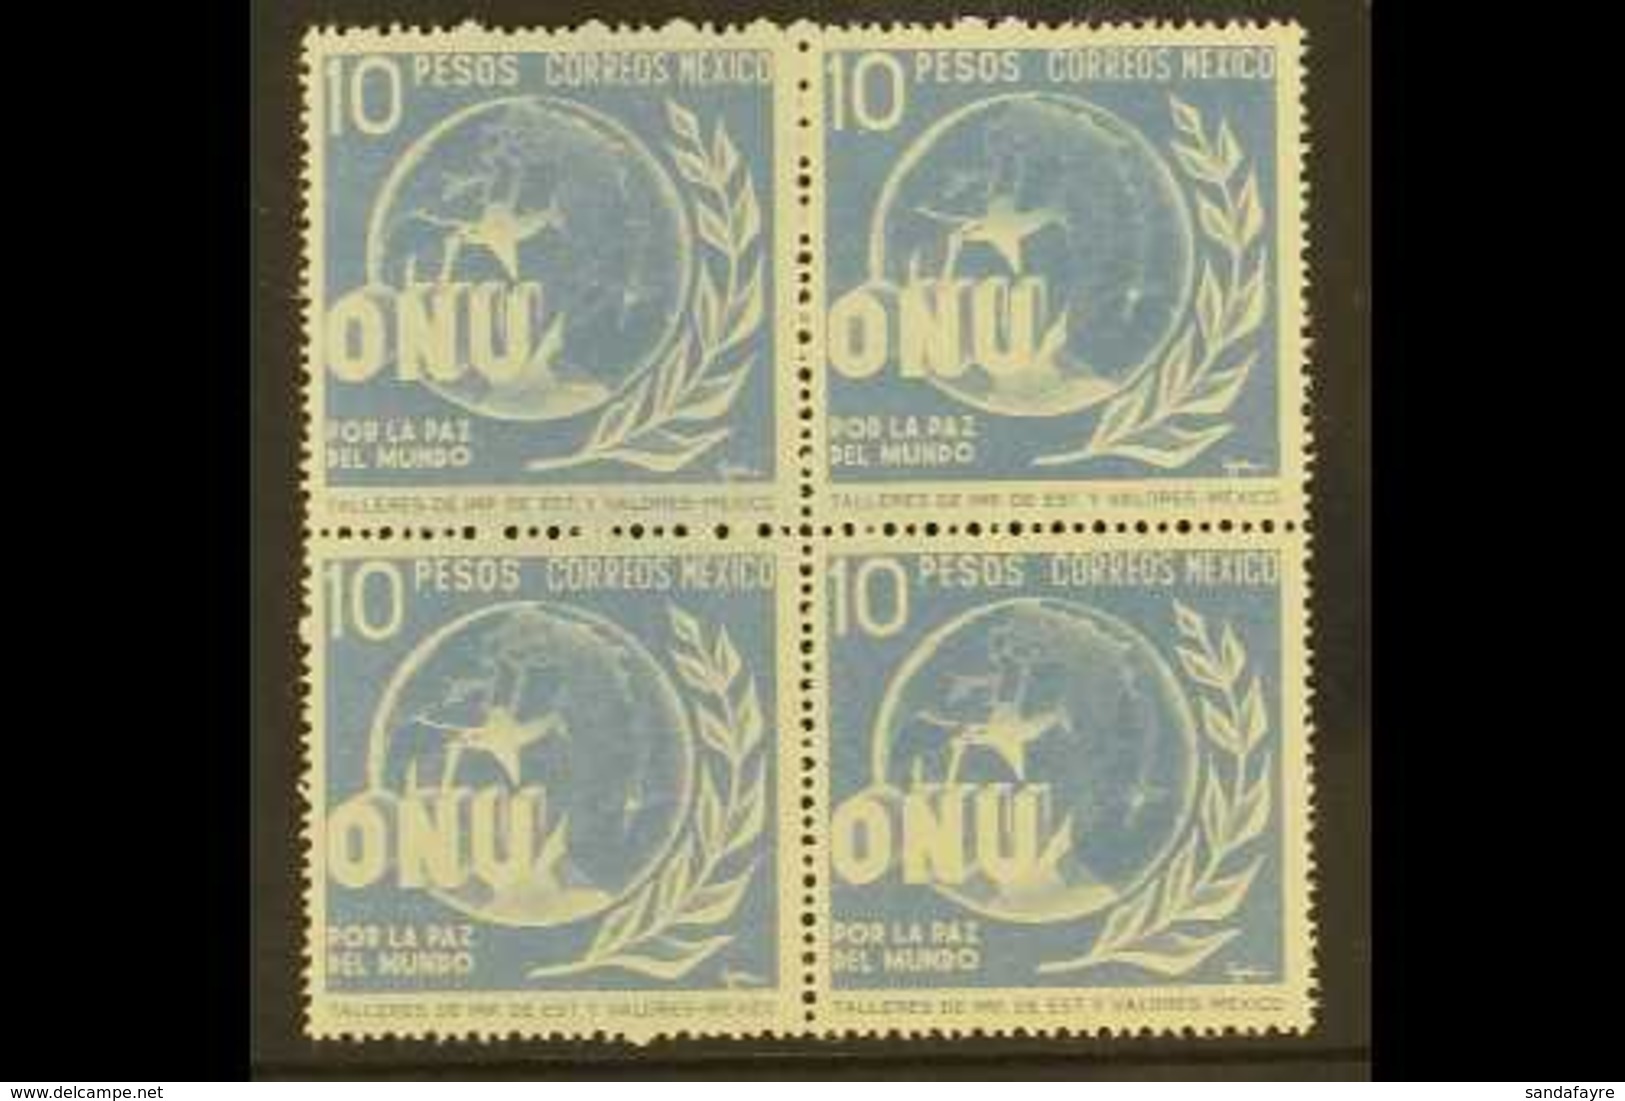 1946  10 Peso Ultramarine "United Nations", SG 771, Scott 818, Never Hinged Mint Block Of 4 (4 Stamps) For More Images,  - Mexico